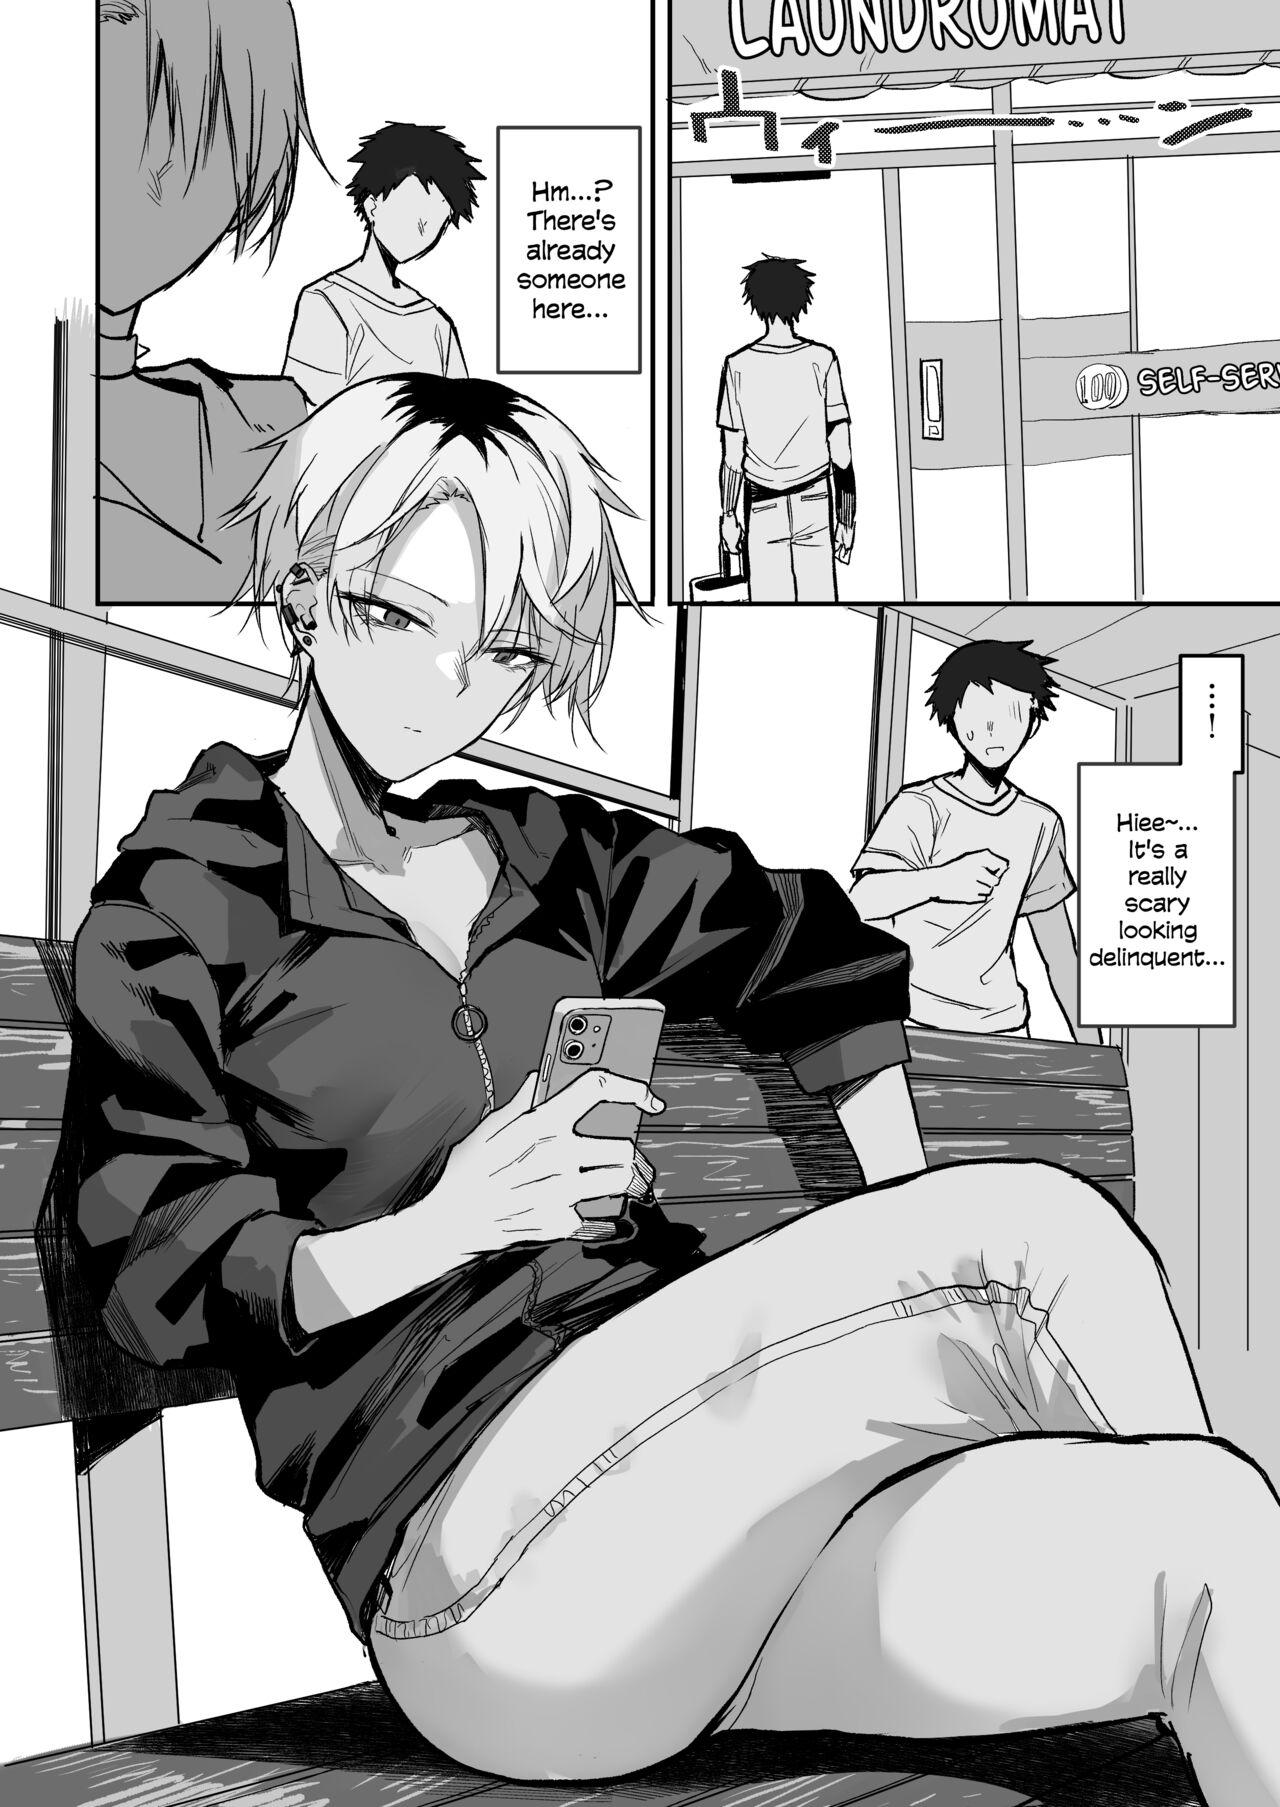 Porno Amateur Coin Laundry de Kowai Yankee ni Karamareru Manga | A Manga About Getting Mixed Up With A Scary Delinquent At The Laundromat - Original Juggs - Picture 1